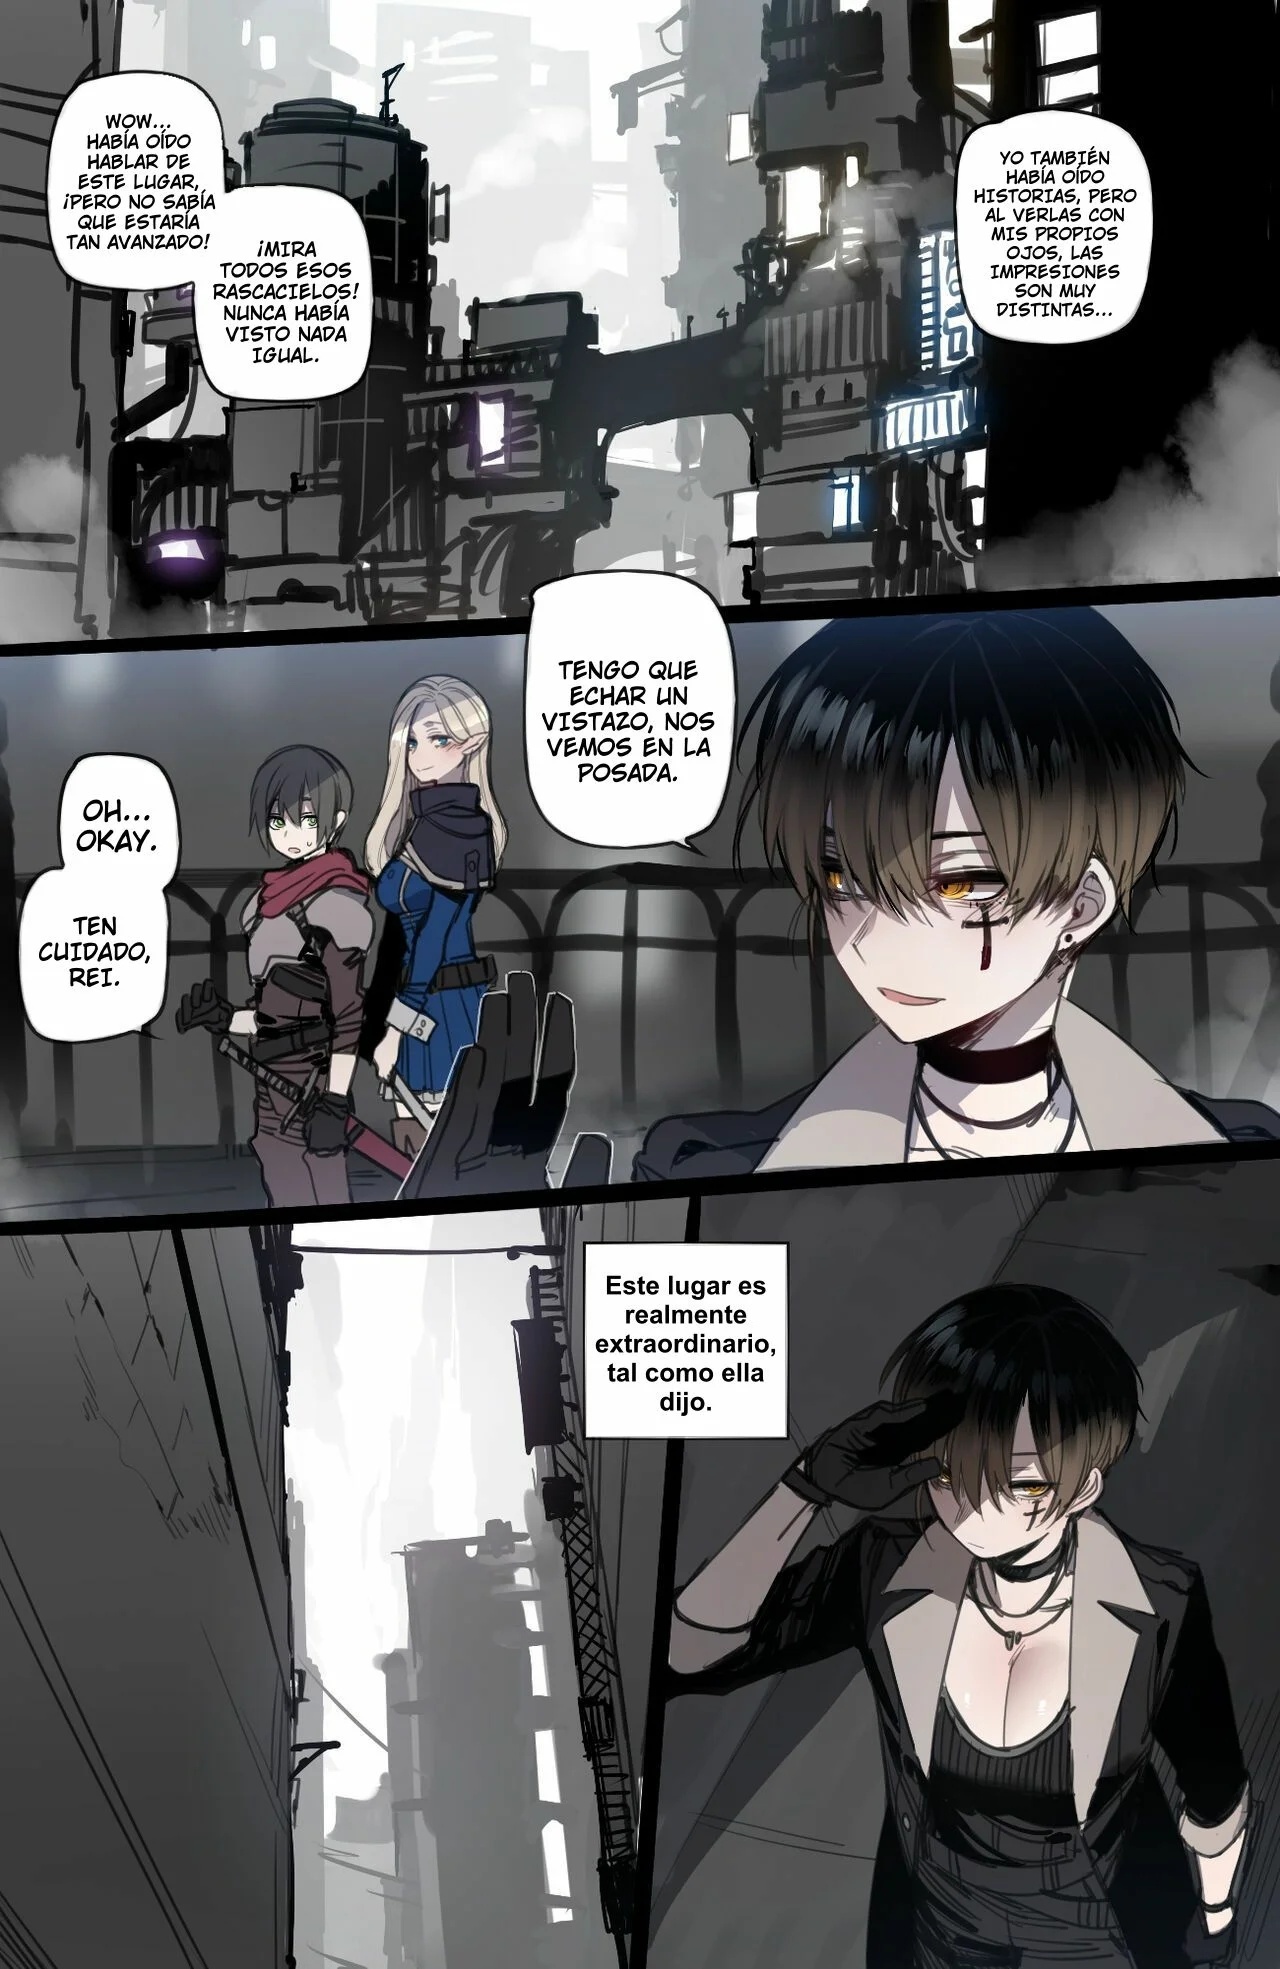 Bad ending party - 16